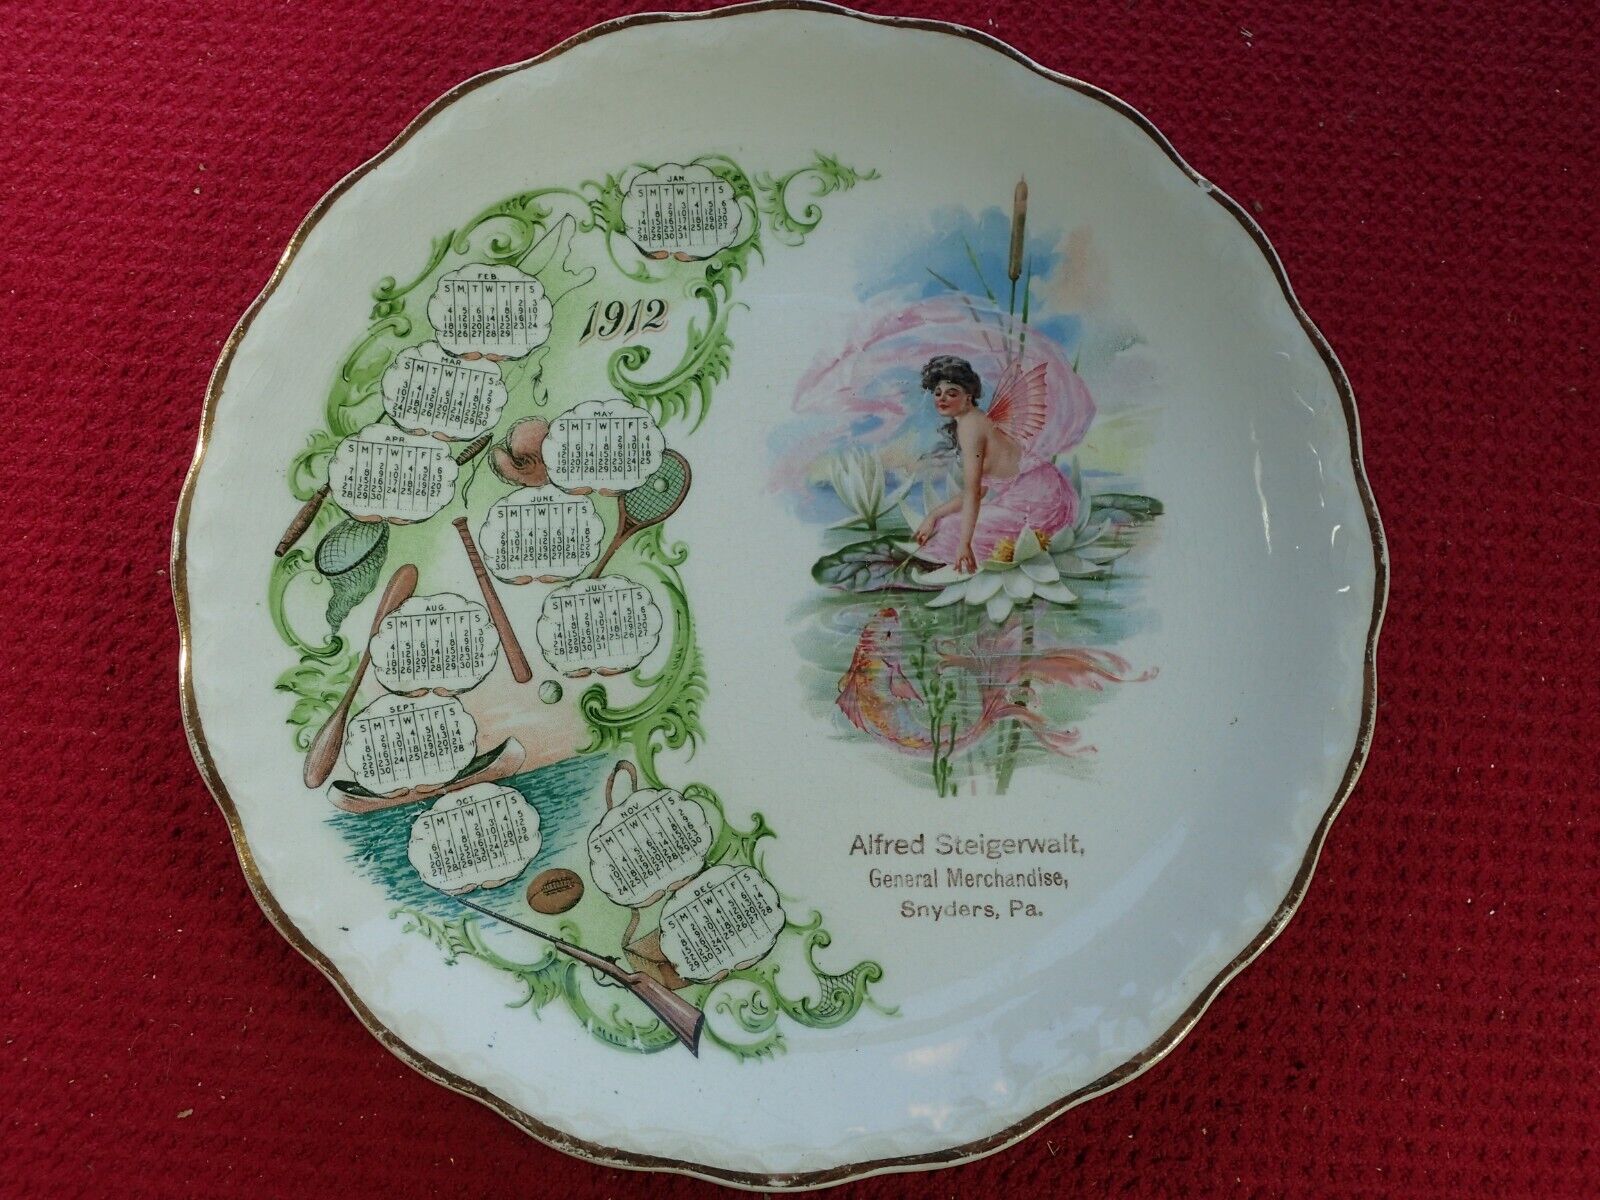 1912 Advertising Calendar Plate with Fairy, Fish & Sports Theme Equipment